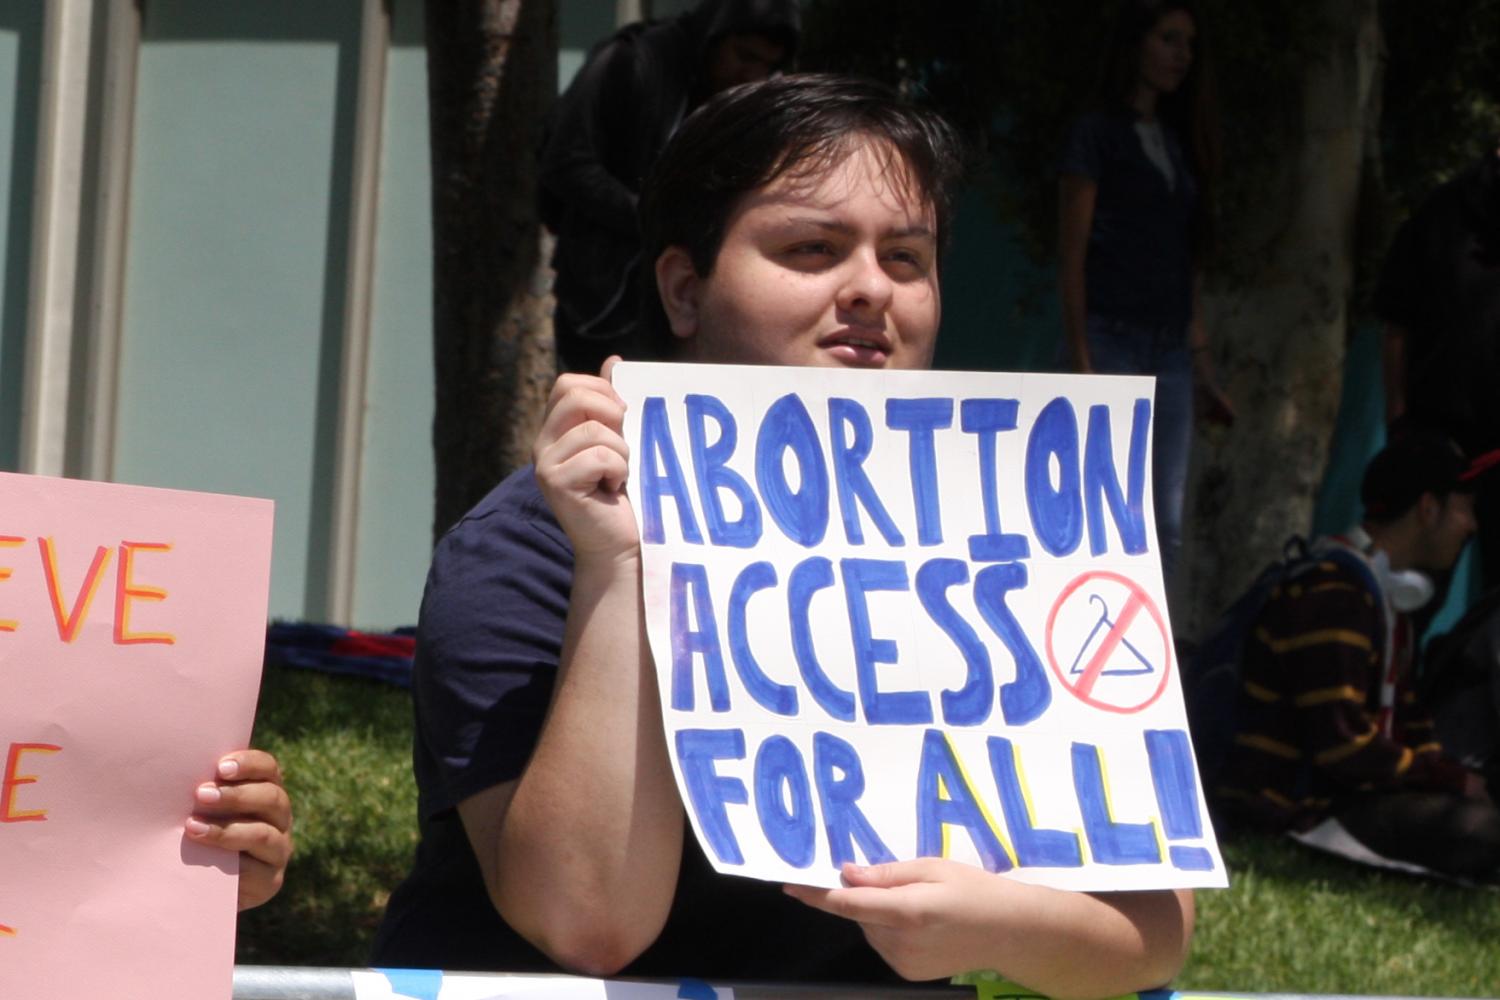 Anthropology major Charles Petersen, protesting the Center for Bio-Ethical Reforms anti-abortion demonstration at Cerritos College on Monday. Petersen is a transgender student that values the freedom of choice. Photo credit: David Jenkins